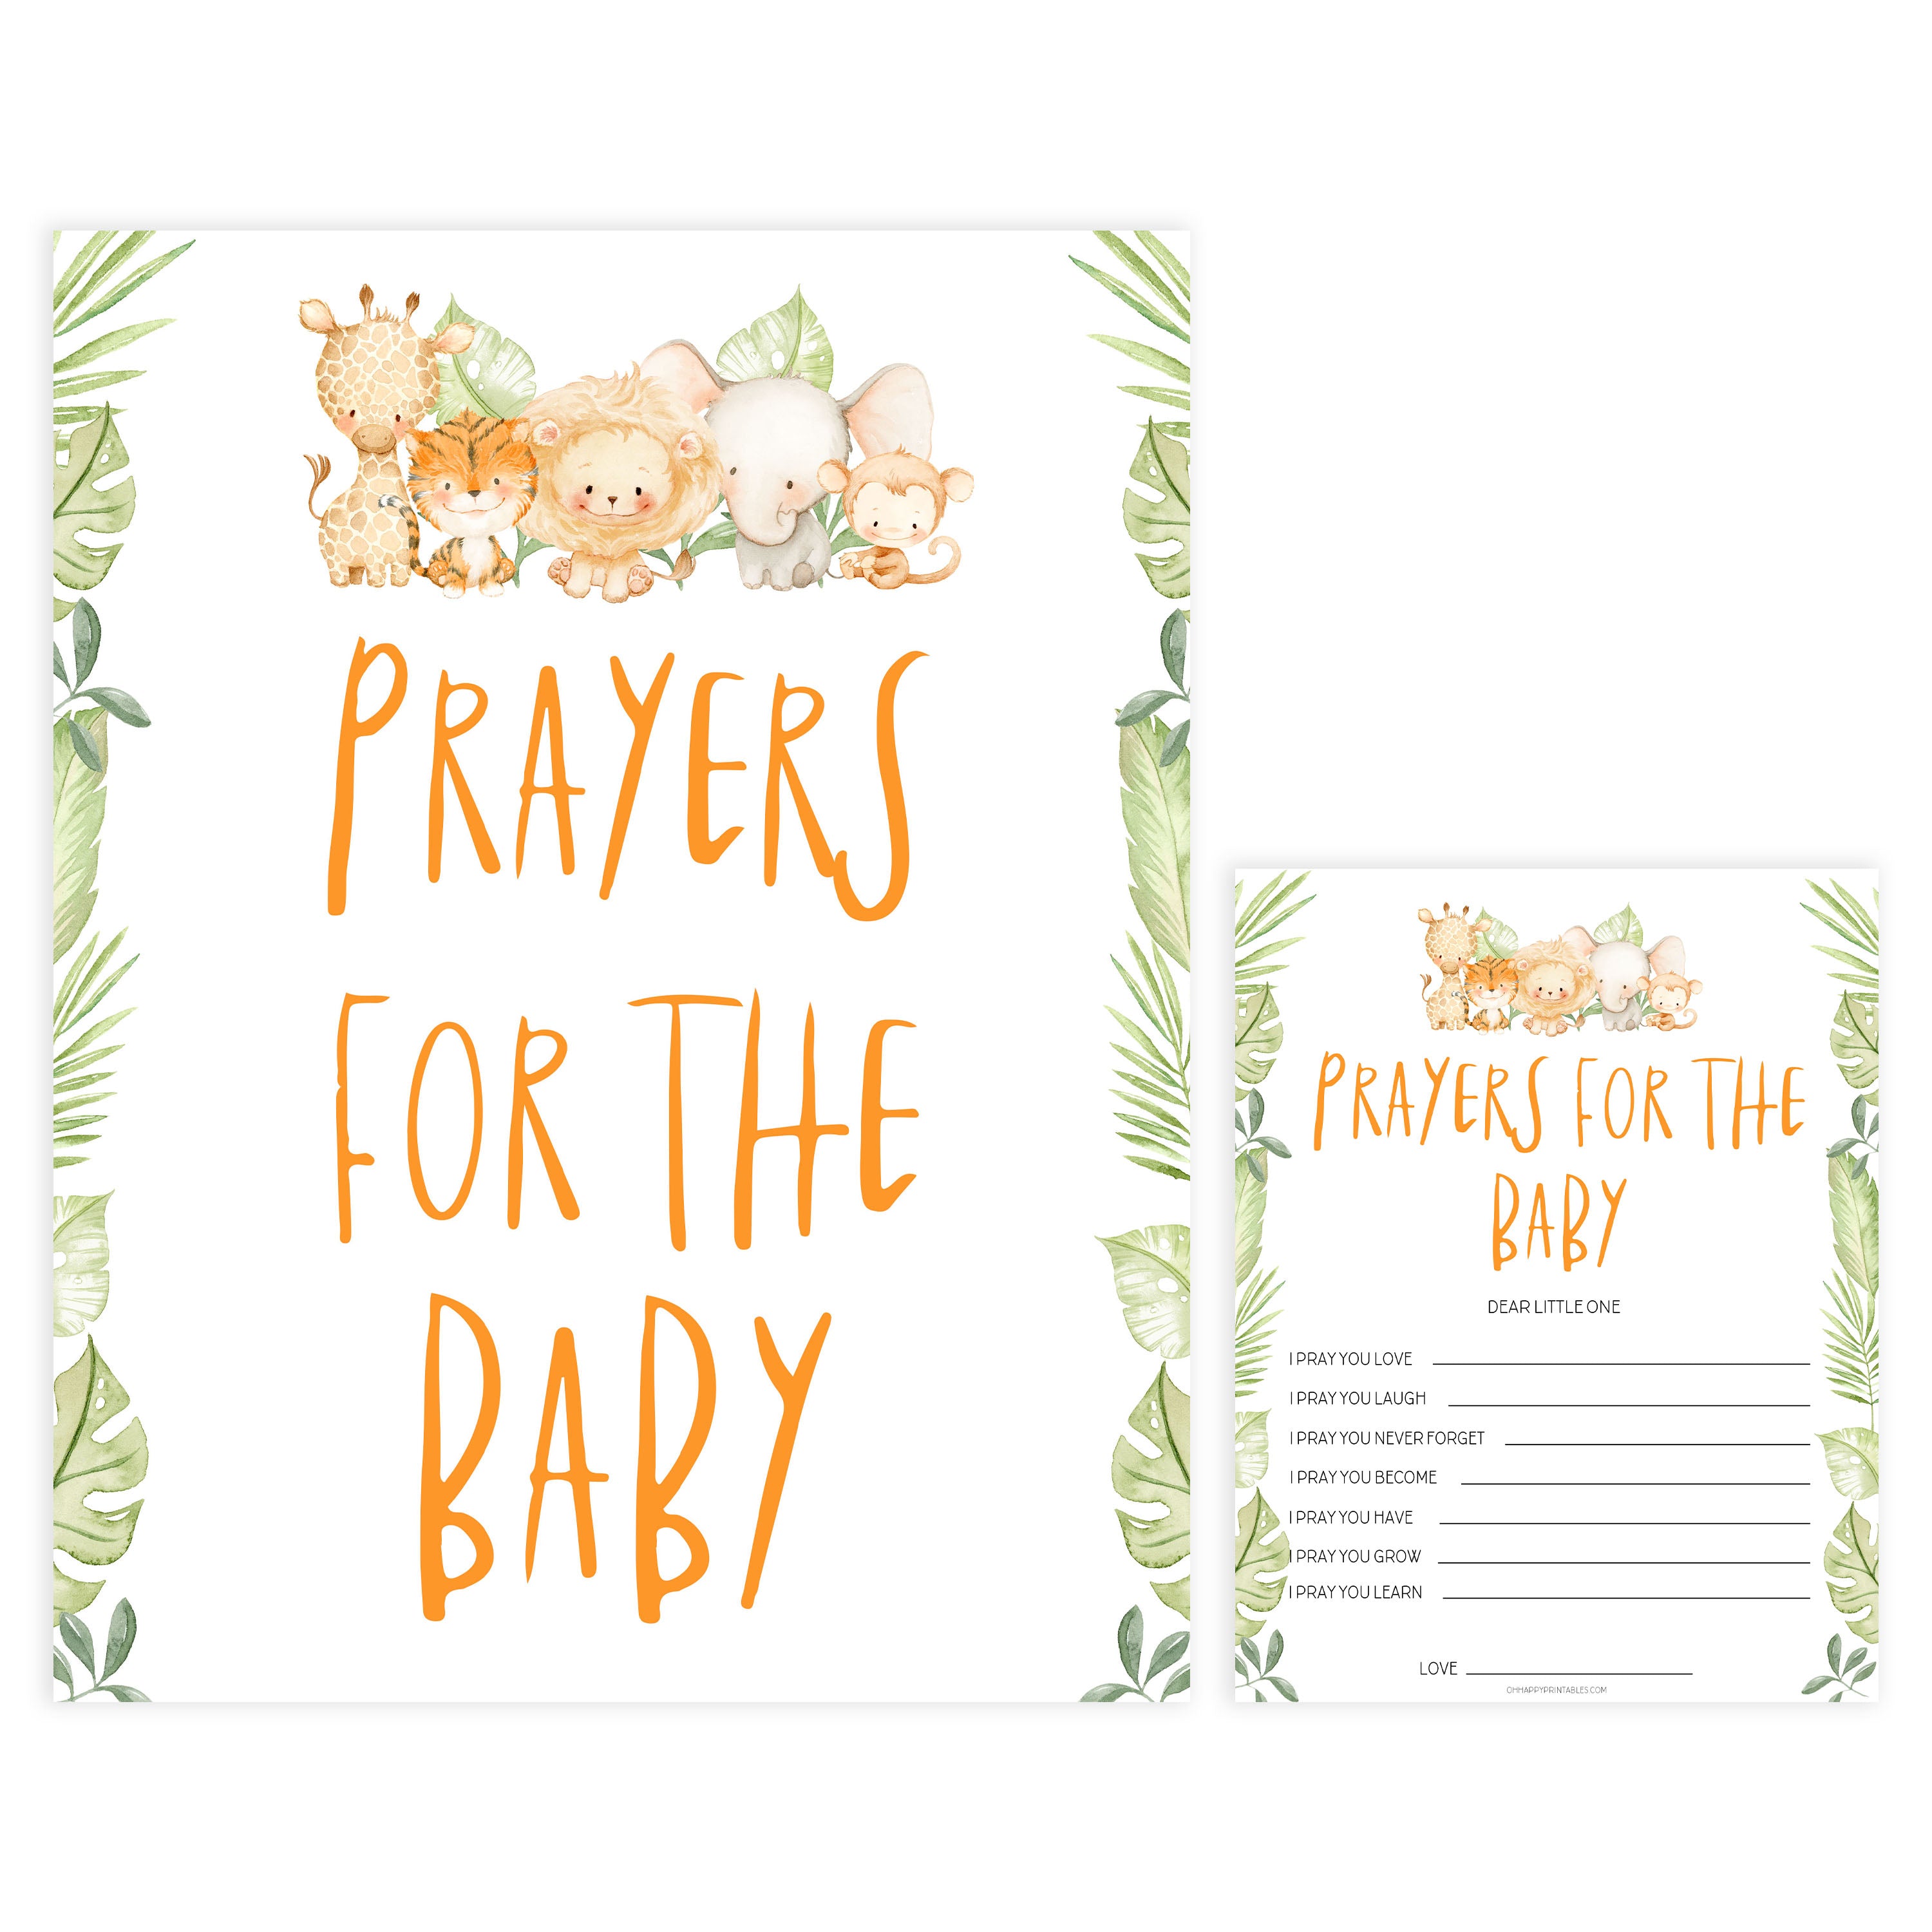 prayers for the baby game, Printable baby shower games, safari animals baby games, baby shower games, fun baby shower ideas, top baby shower ideas, safari animals baby shower, baby shower games, fun baby shower ideas